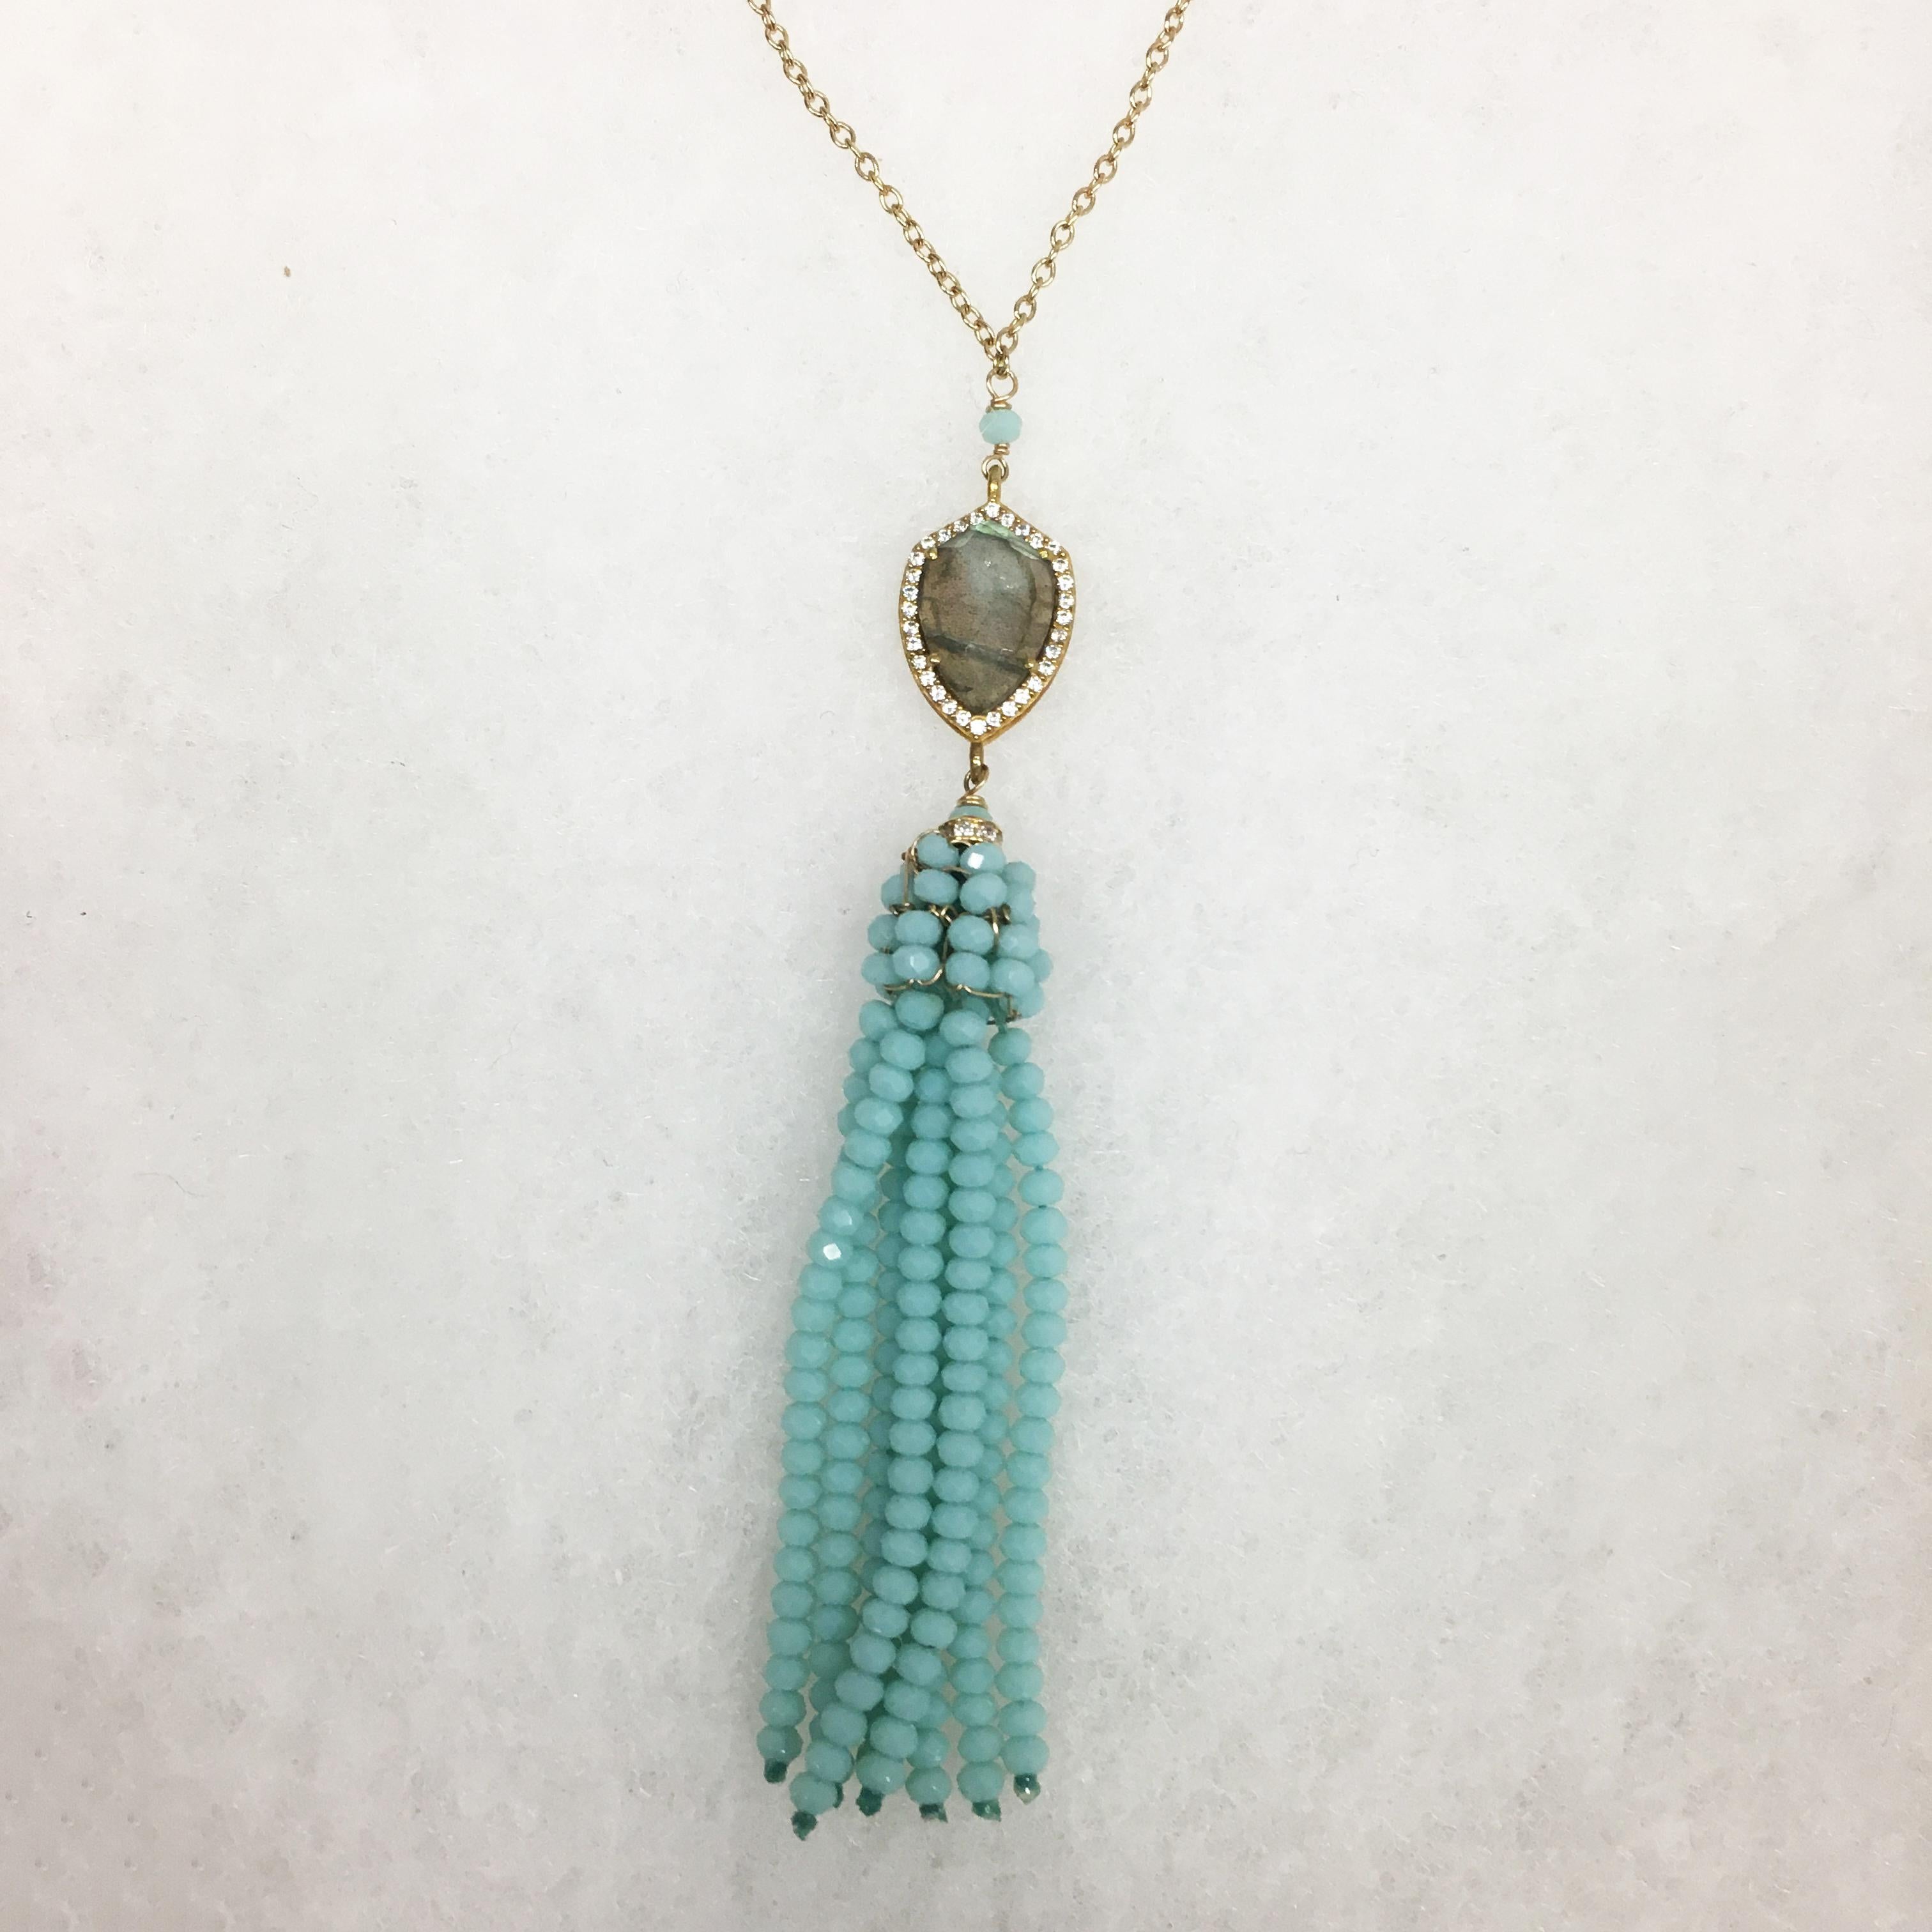 Mint Chalcedony and Labradorite Tassel Necklace with CZ - Art by Emily Elaine